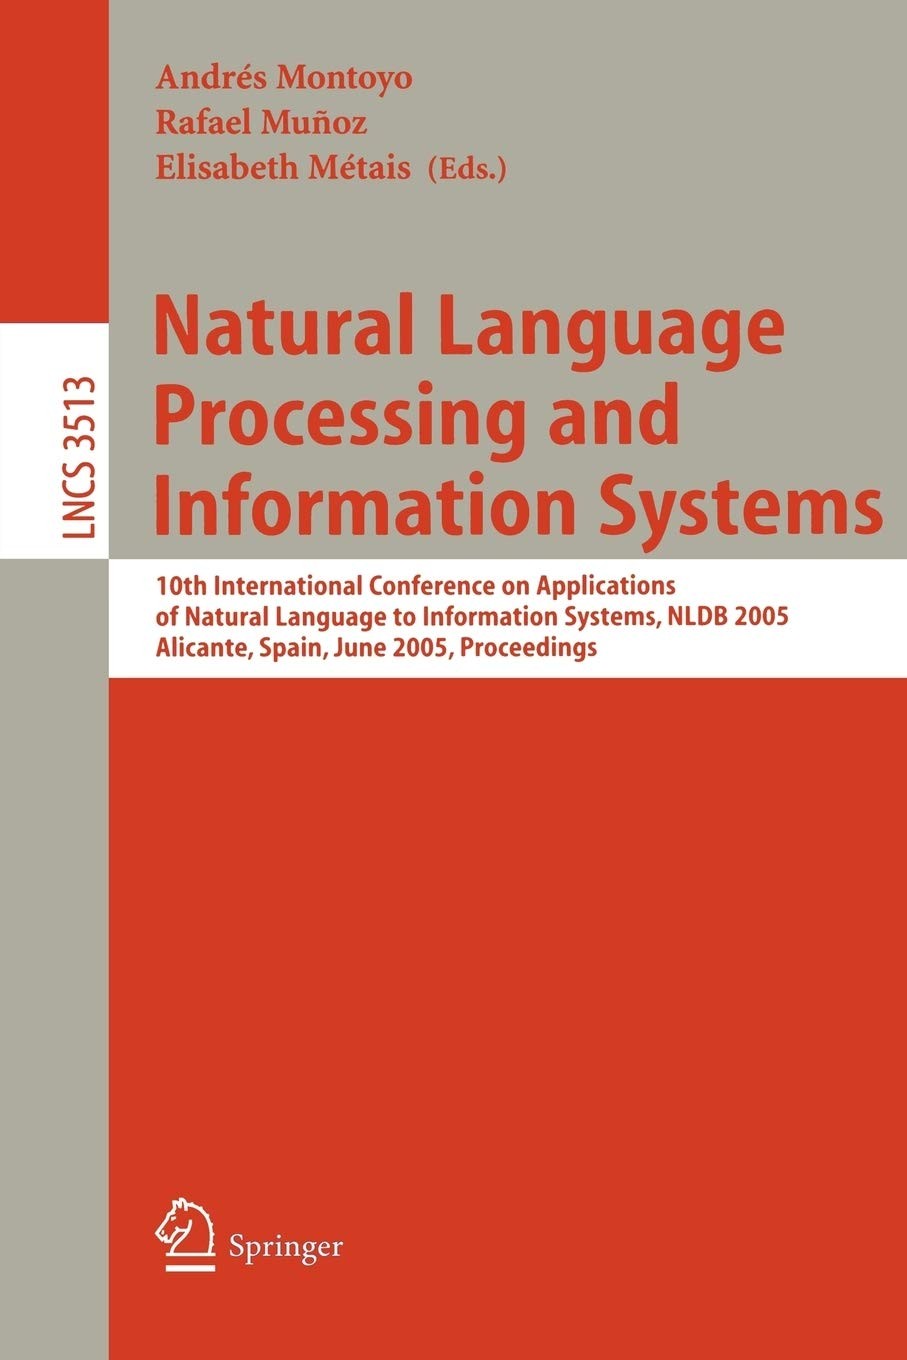 Natural Language Processing and Information Systems: 10th International Conference on Applications of Natural Language to Information Systems, NLDB 2005, Alicante, Spain, June 15-17, Proceedings